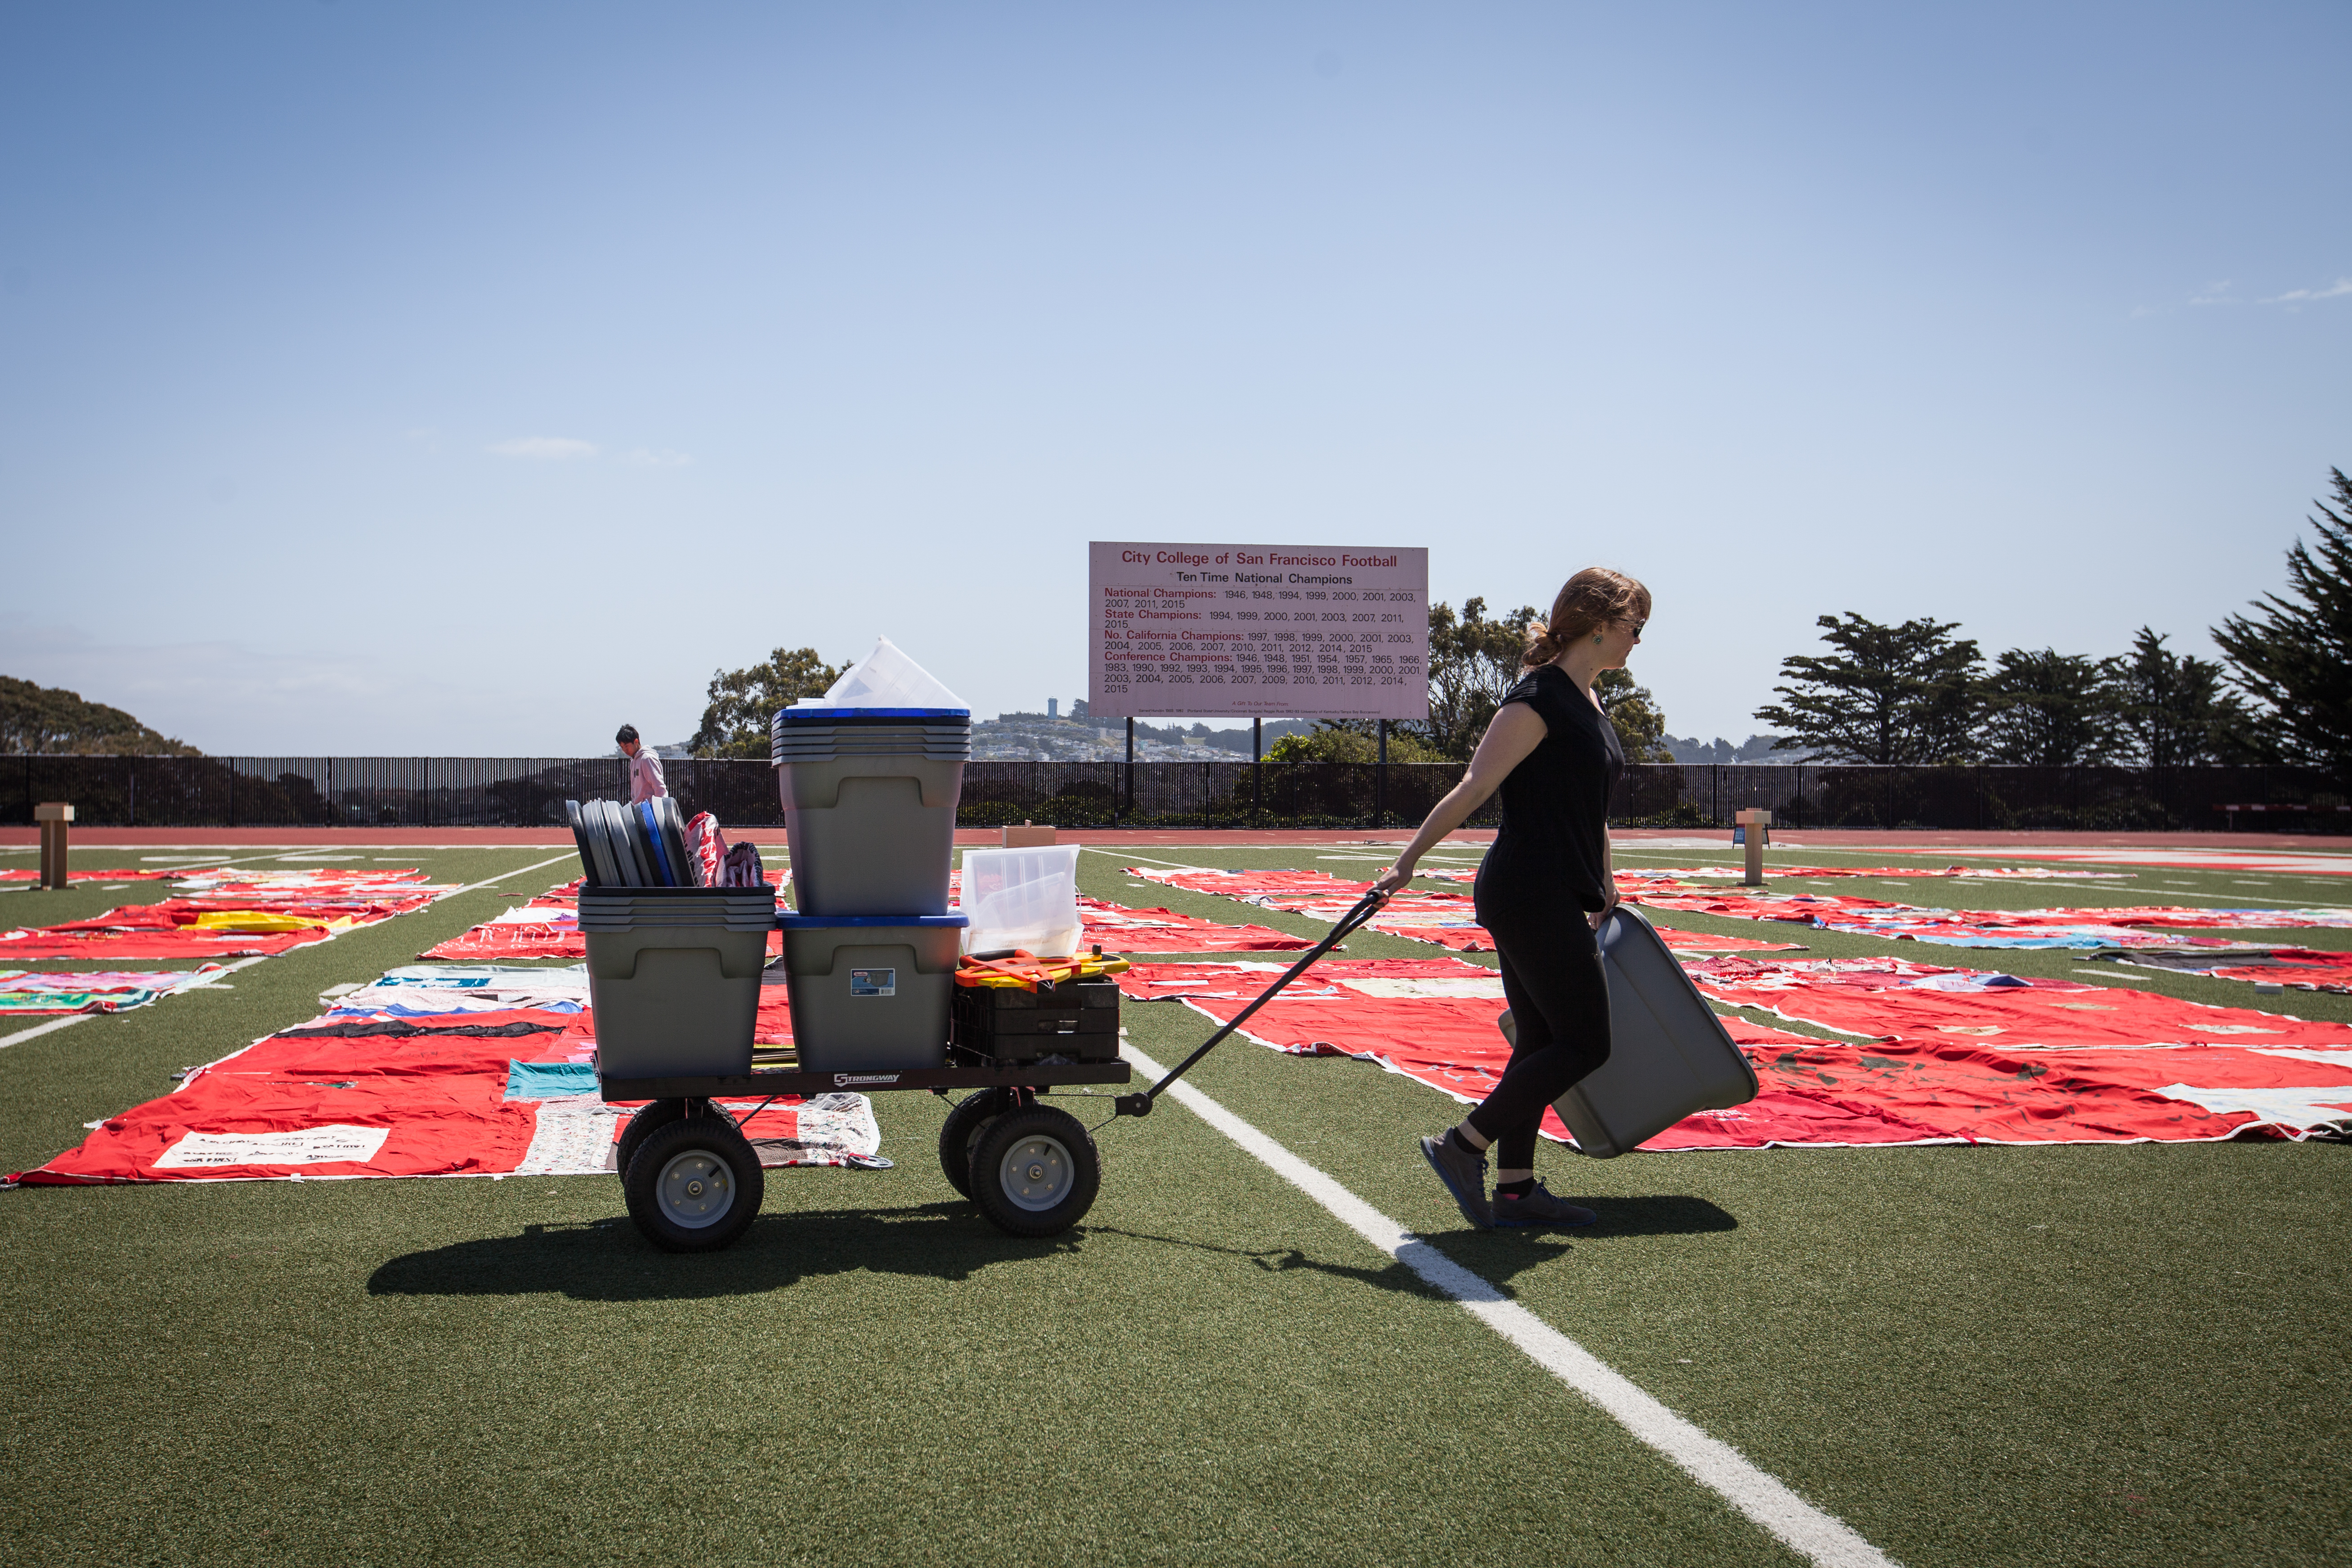 Co-Founder of FORCE: Upsetting Rape Culture Hannah Brancato helps set up during the installation of The Monument Quilt on the football field of George M. Rush Stadium at City College of San Francisco Ocean Campus on Saturday, May 6, 2017. (Photo by Ekevara Kitpowsong)